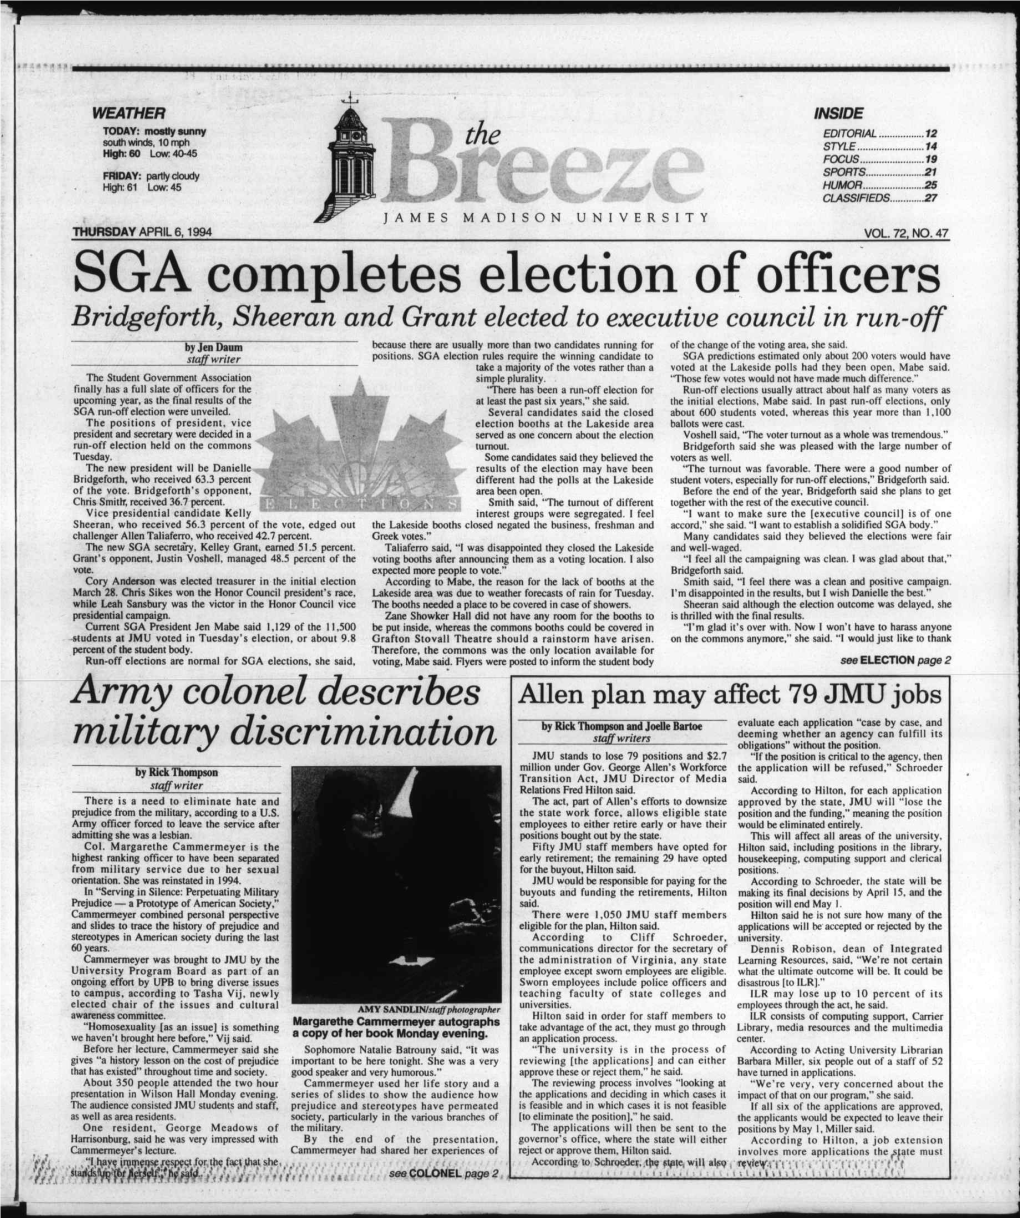 SGA Completes Election of Officers